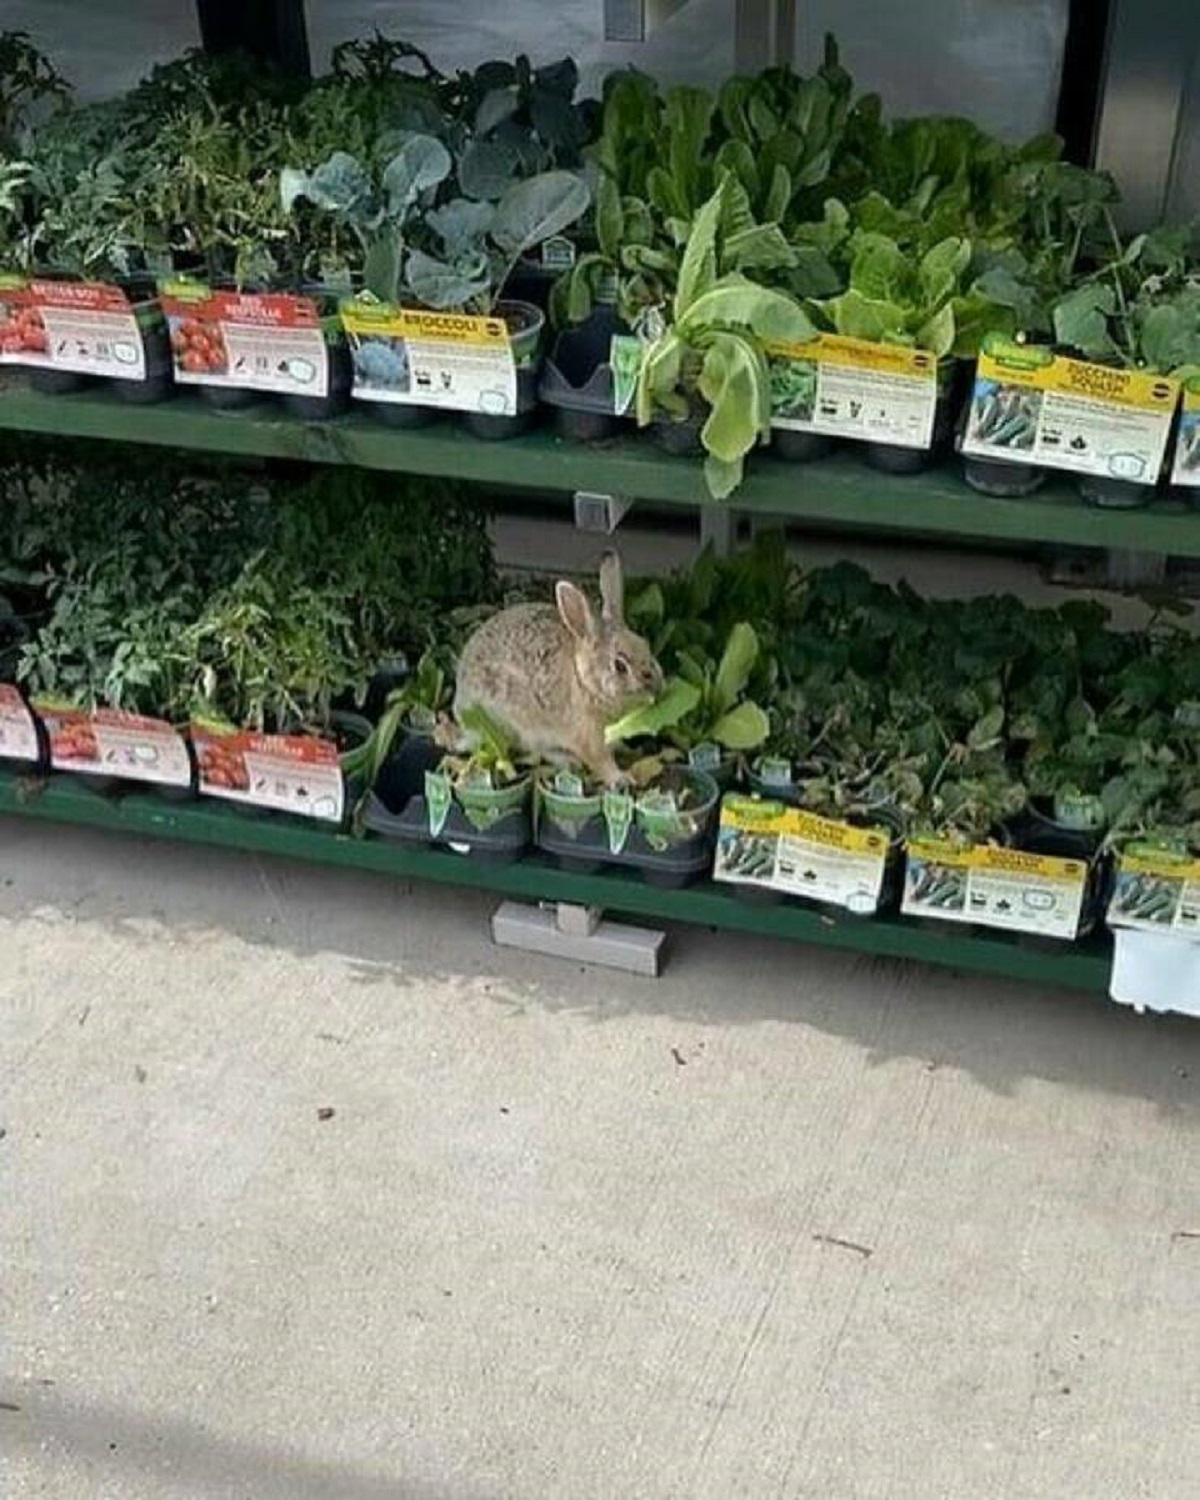 "A Rabbit Munching On Leaves In The Home Depot Gardening Section"